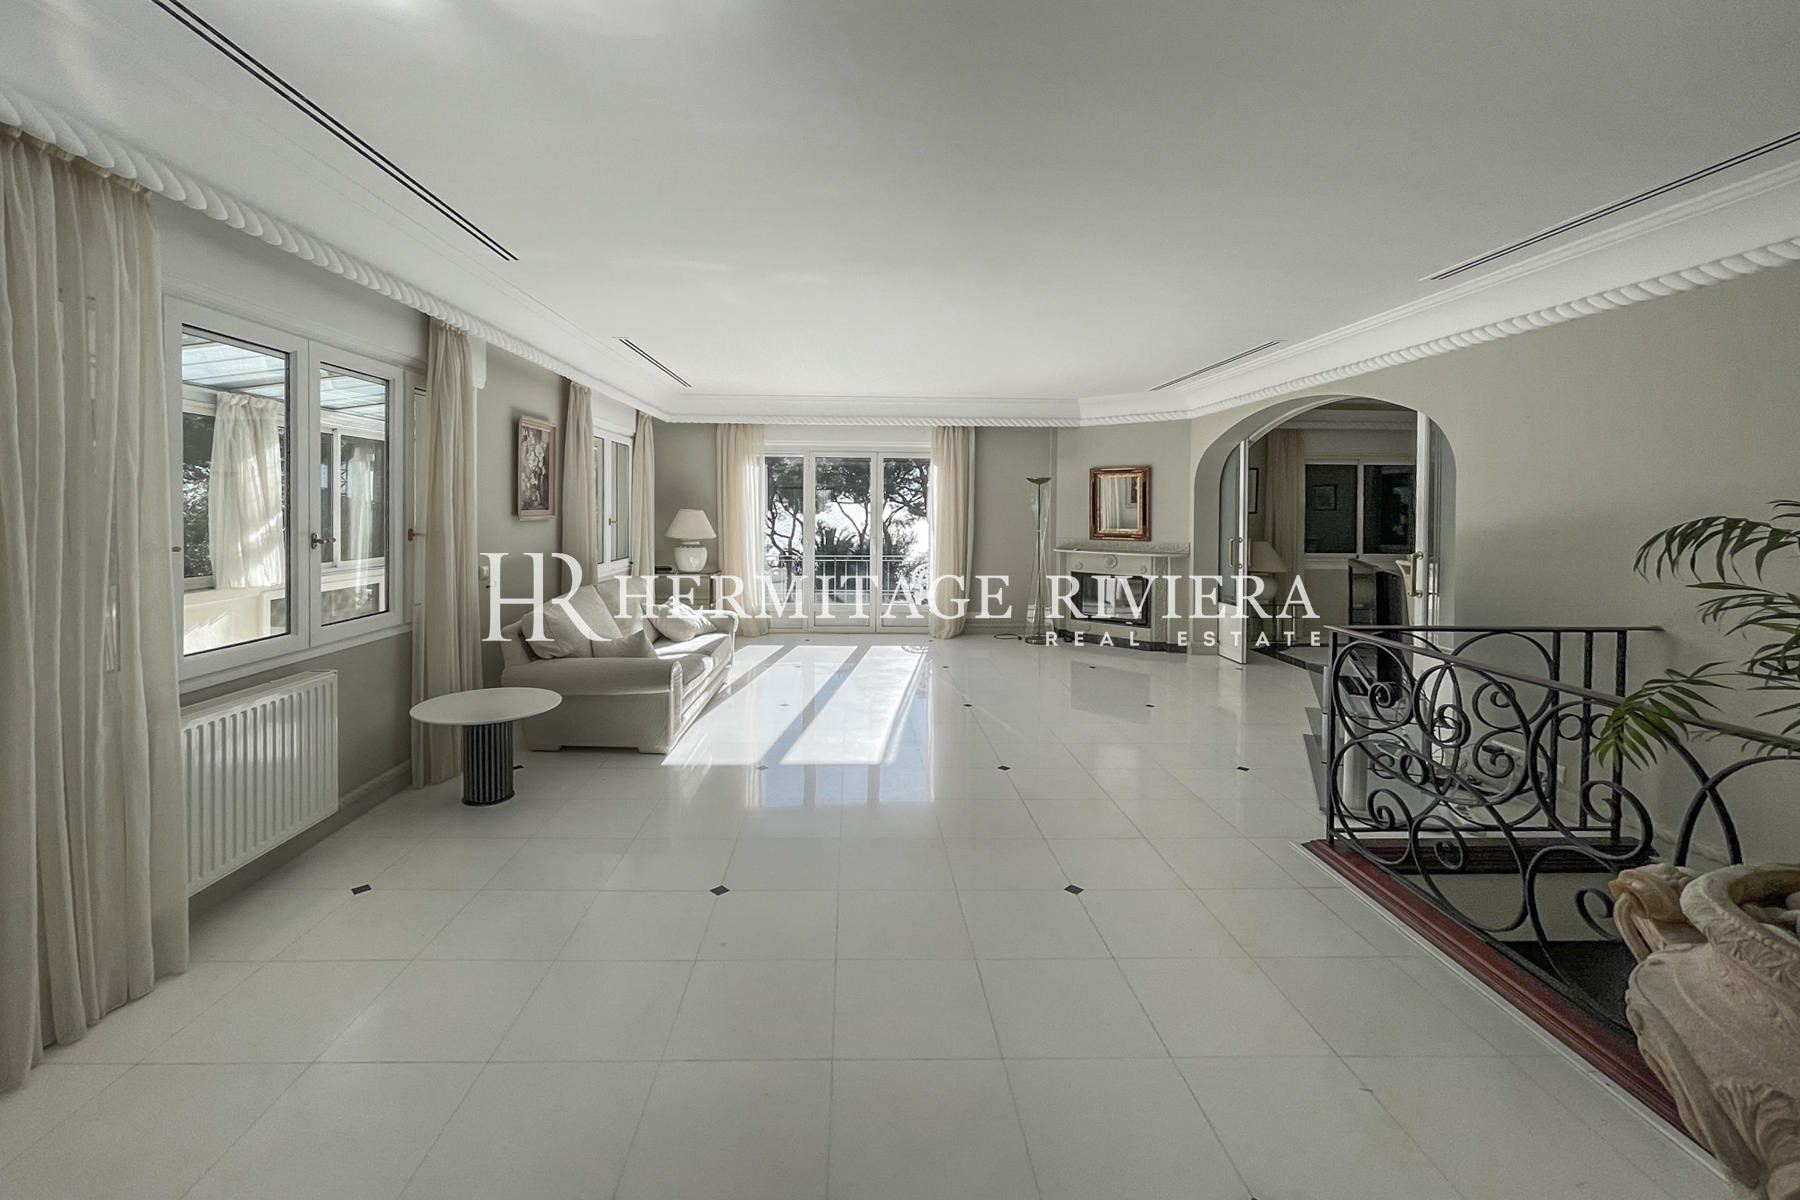 Property with views Monaco in sought after location (image 8)